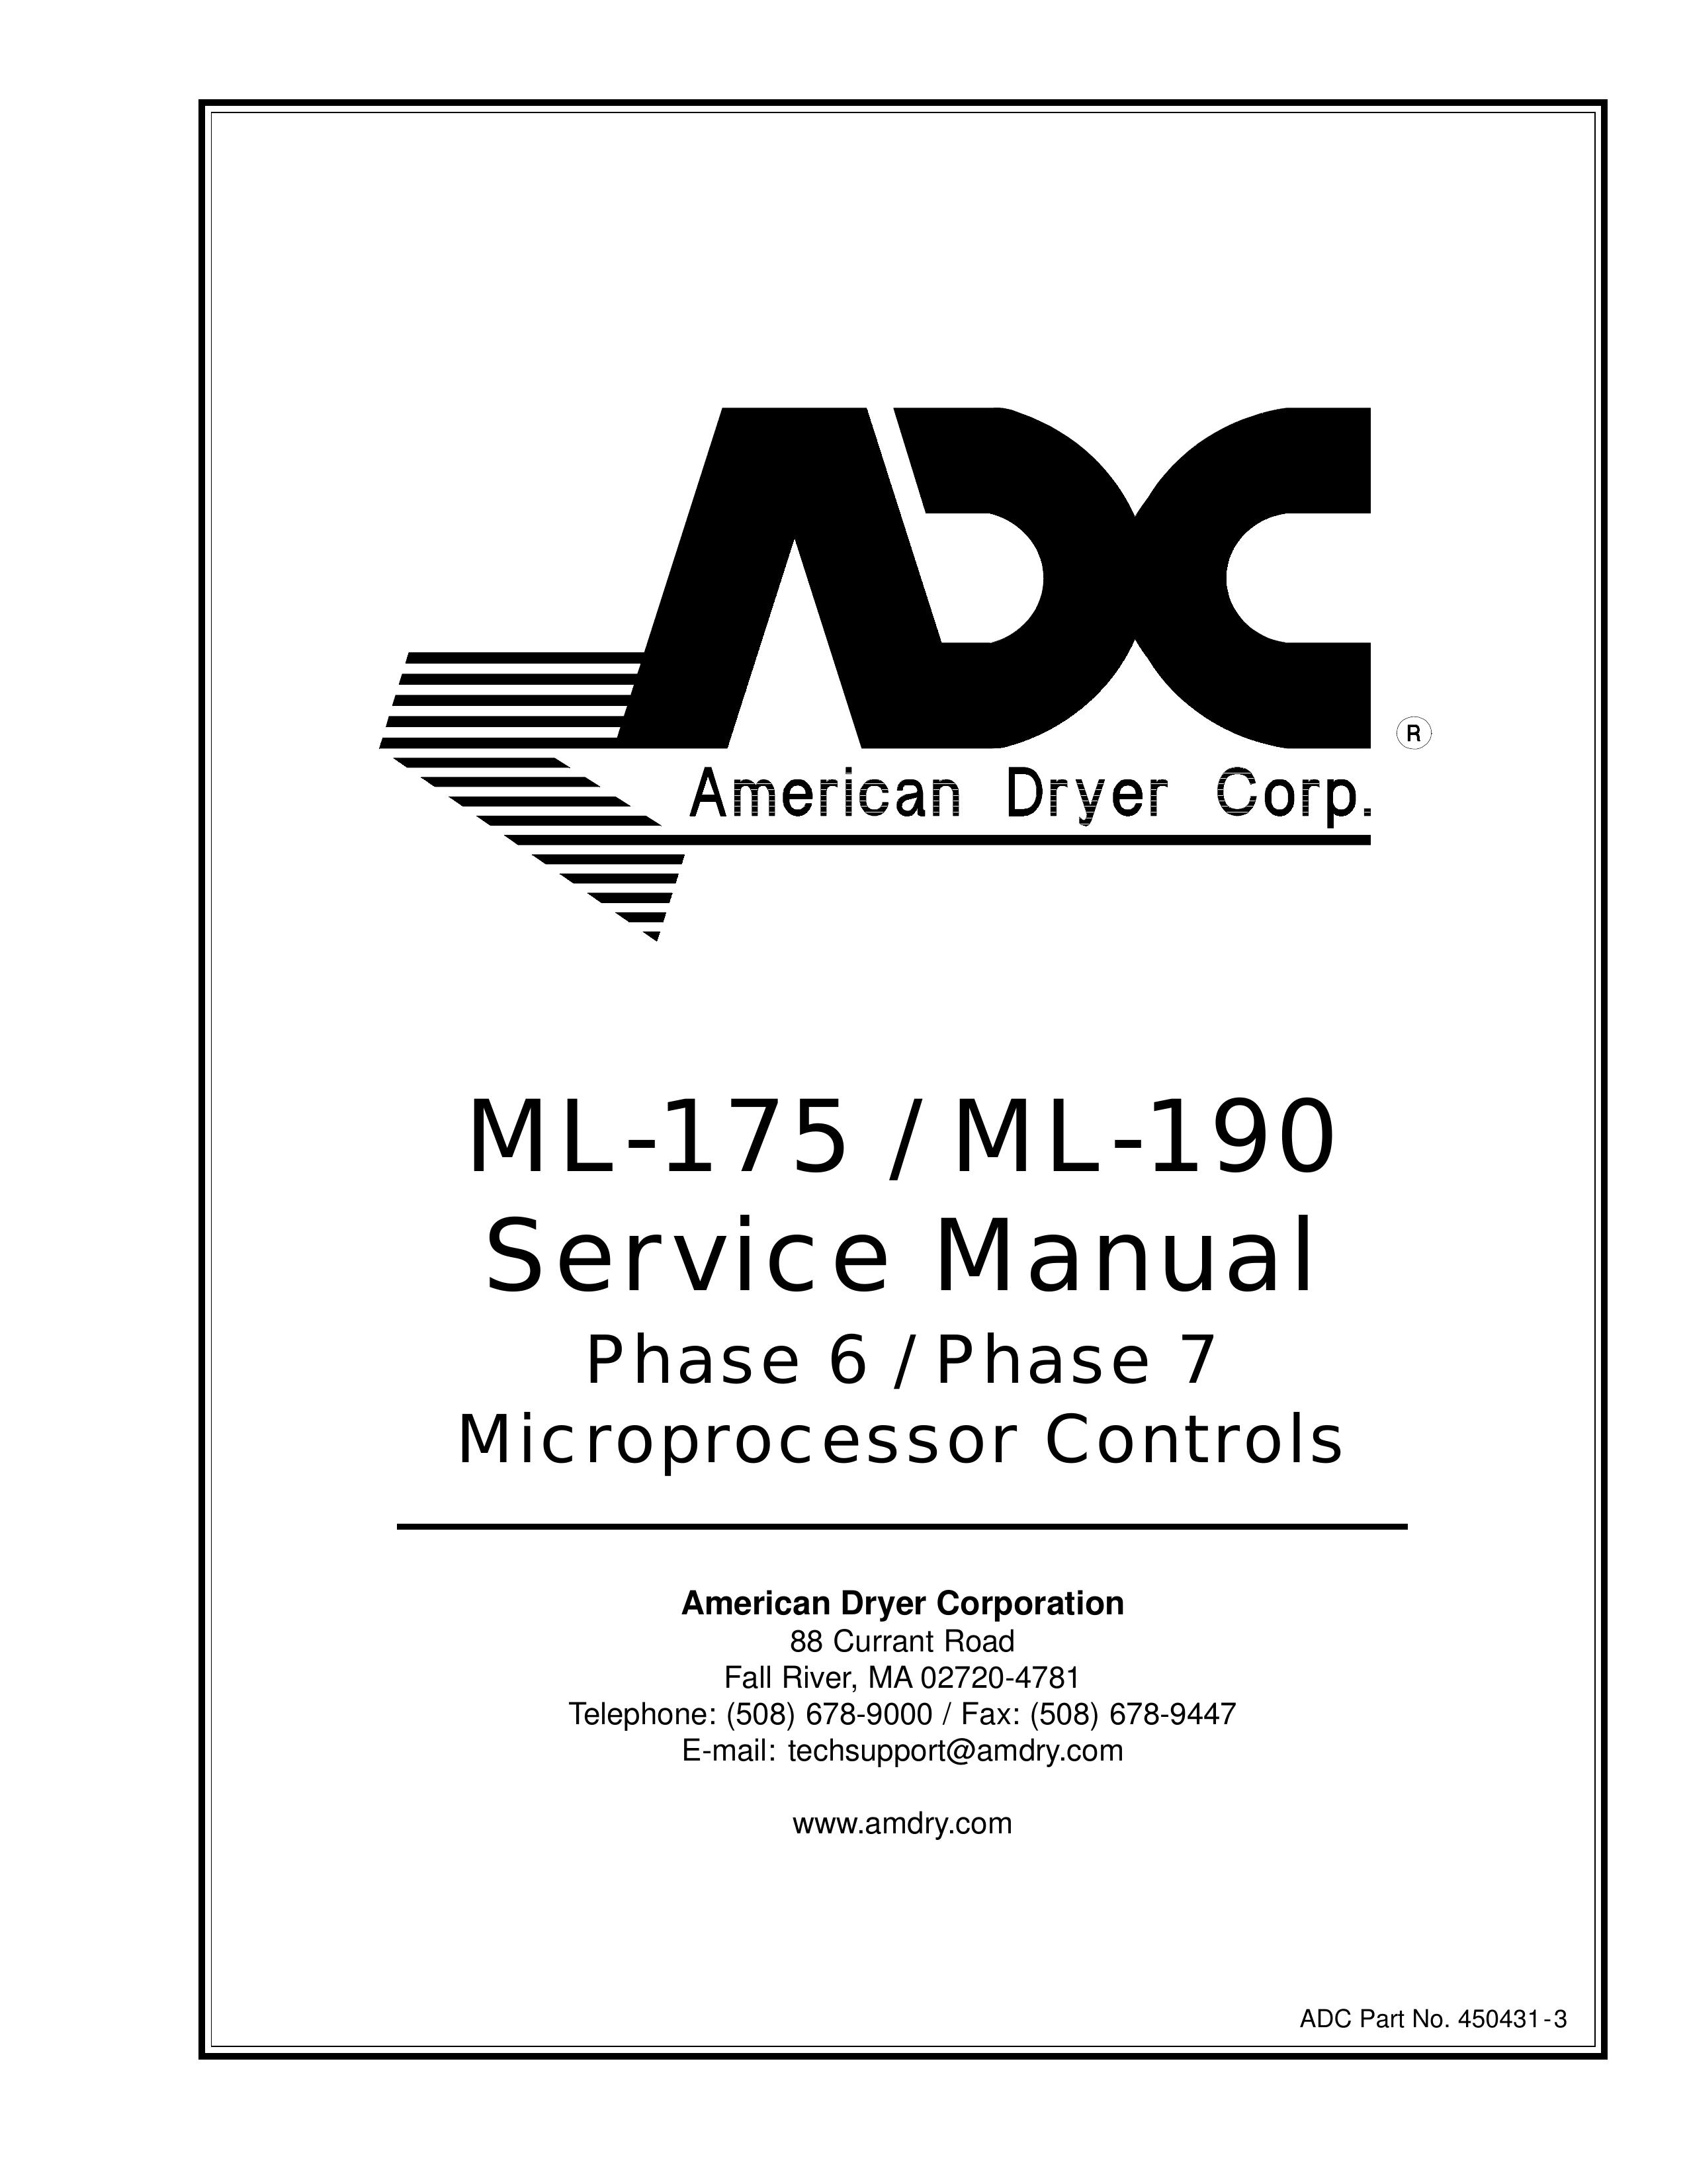 ADC ML-175 Clothes Dryer User Manual (Page 1)